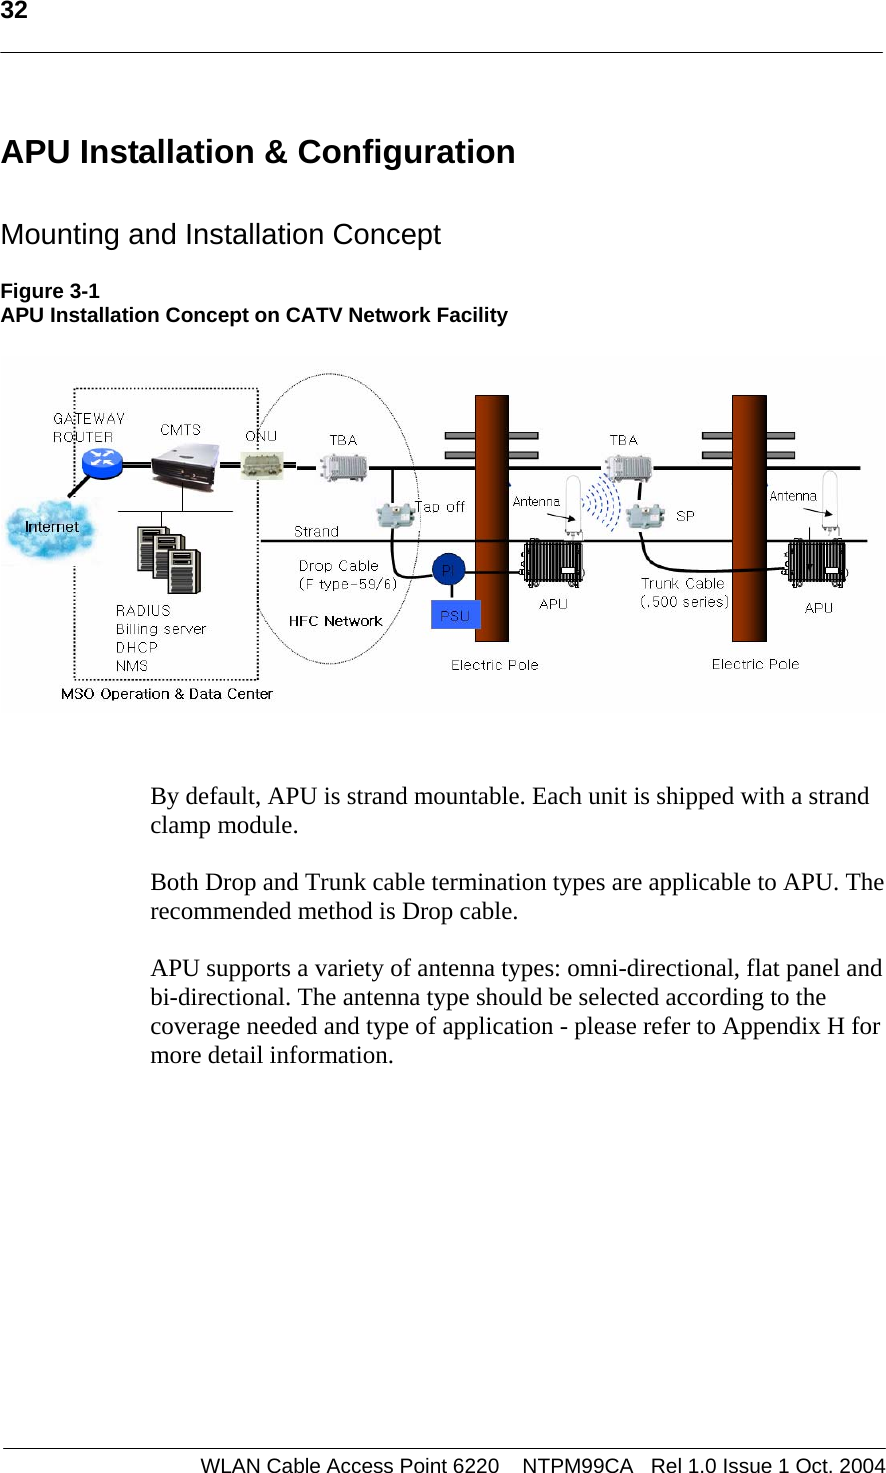   32    APU Installation &amp; Configuration  Mounting and Installation Concept   Figure 3-1 APU Installation Concept on CATV Network Facility      By default, APU is strand mountable. Each unit is shipped with a strand clamp module.   Both Drop and Trunk cable termination types are applicable to APU. The recommended method is Drop cable.  APU supports a variety of antenna types: omni-directional, flat panel and bi-directional. The antenna type should be selected according to the coverage needed and type of application - please refer to Appendix H for more detail information.            WLAN Cable Access Point 6220    NTPM99CA   Rel 1.0 Issue 1 Oct. 2004